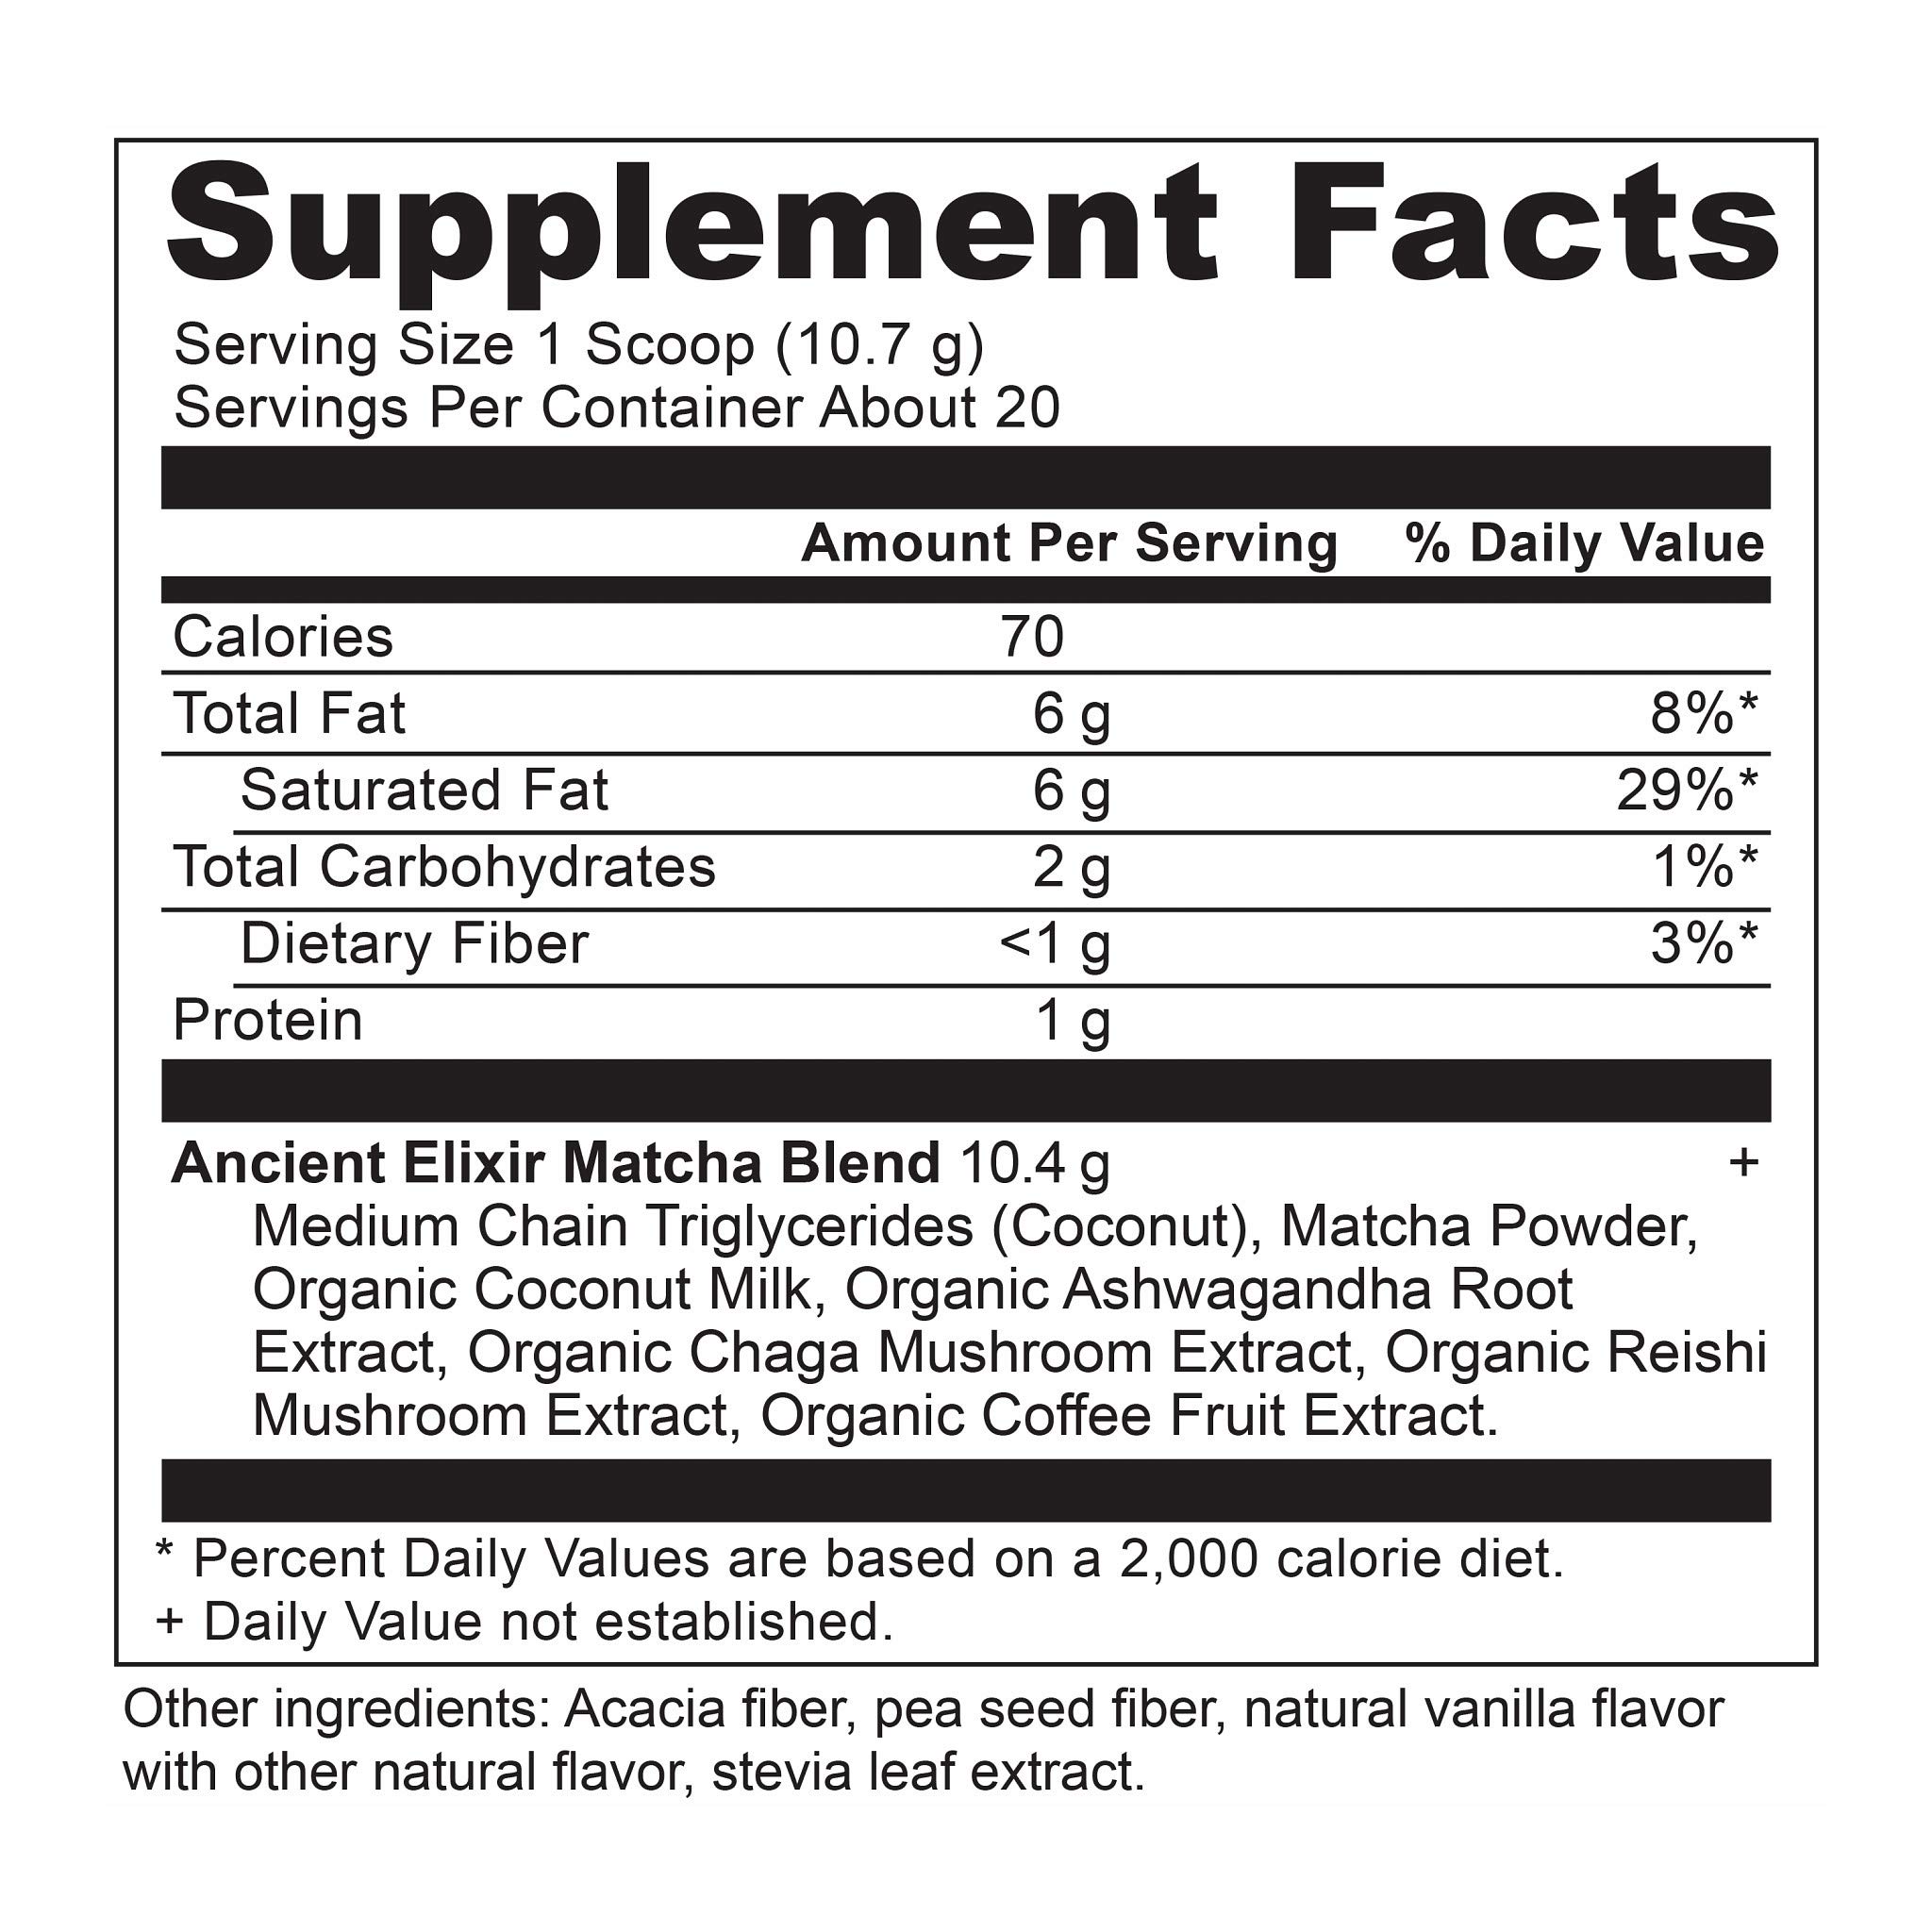 Matcha Green Tea Powder with Ashwagandha by Ancient Nutrition, Ancient Elixirs Superfood Matcha Energy Powder, with MCTs, Promotes Healthy Energy Levels, Paleo and Keto Friendly, 20 Servings